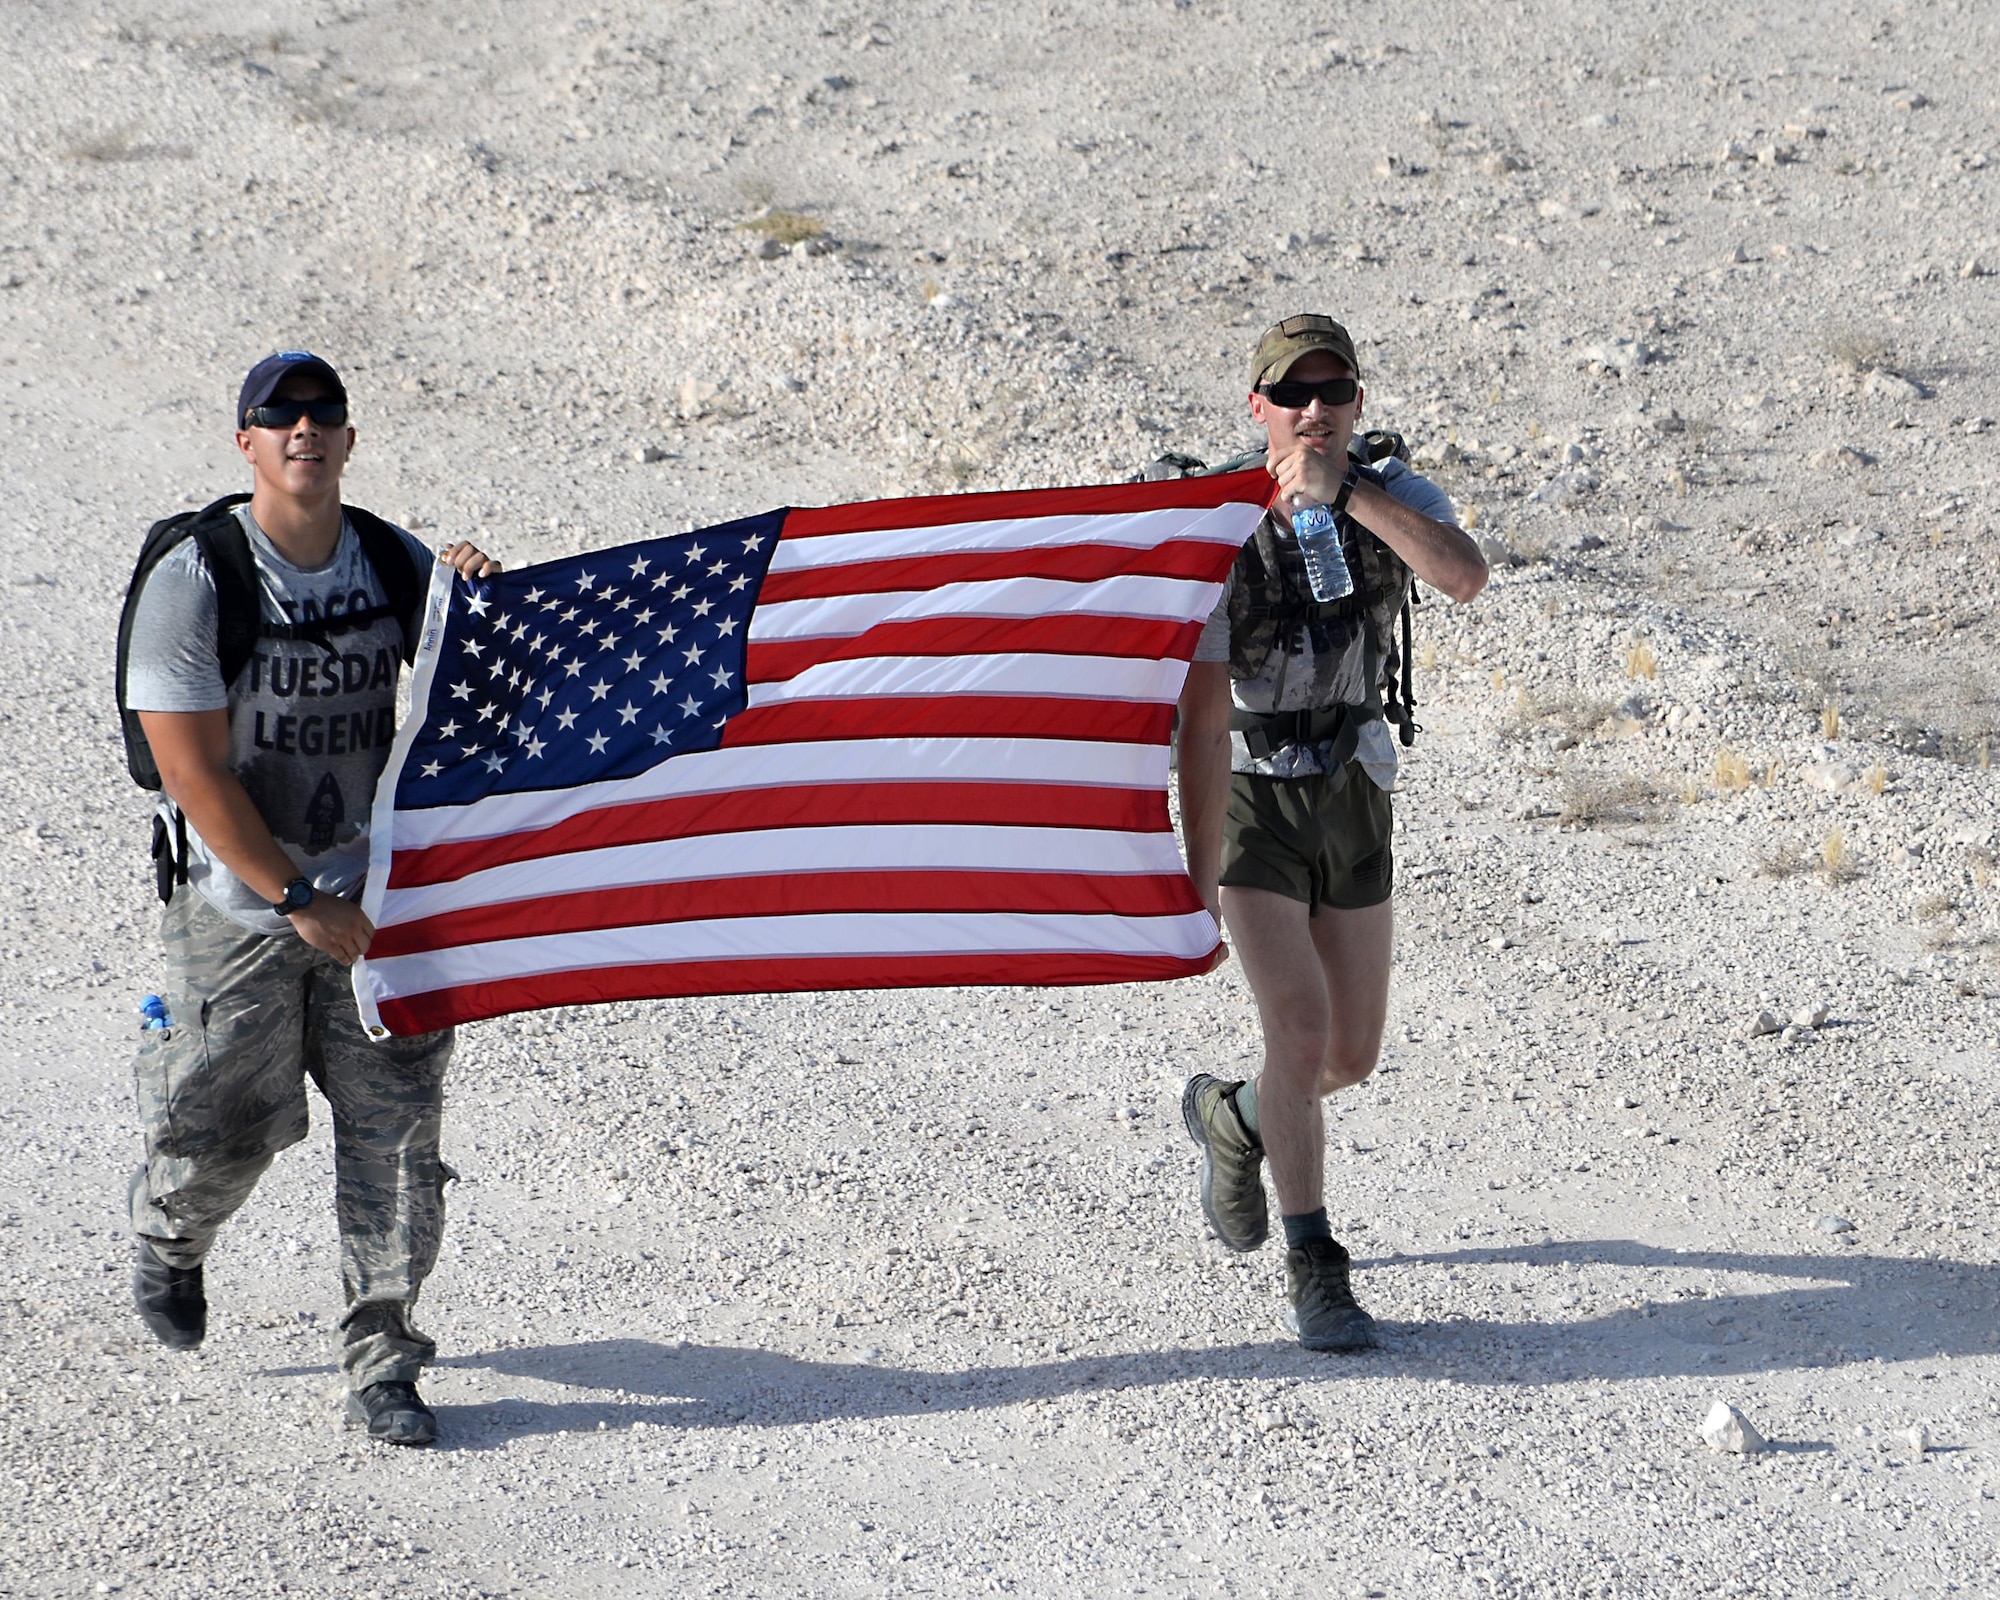 Members from the U.S. Air Force take part in an early morning ruck march on day two of police week at Al Udeid Air Base, Qatar May 16, 2017. Airmen from the 379th ESFS organized a week of law enforcement activities to honor fallen civilian police officers, security forces airmen and U.S. Air Force Office of Special Investigations agents who died in the line of duty. (U.S. Air Force photo by Tech. Sgt. Bradly A. Schneider)